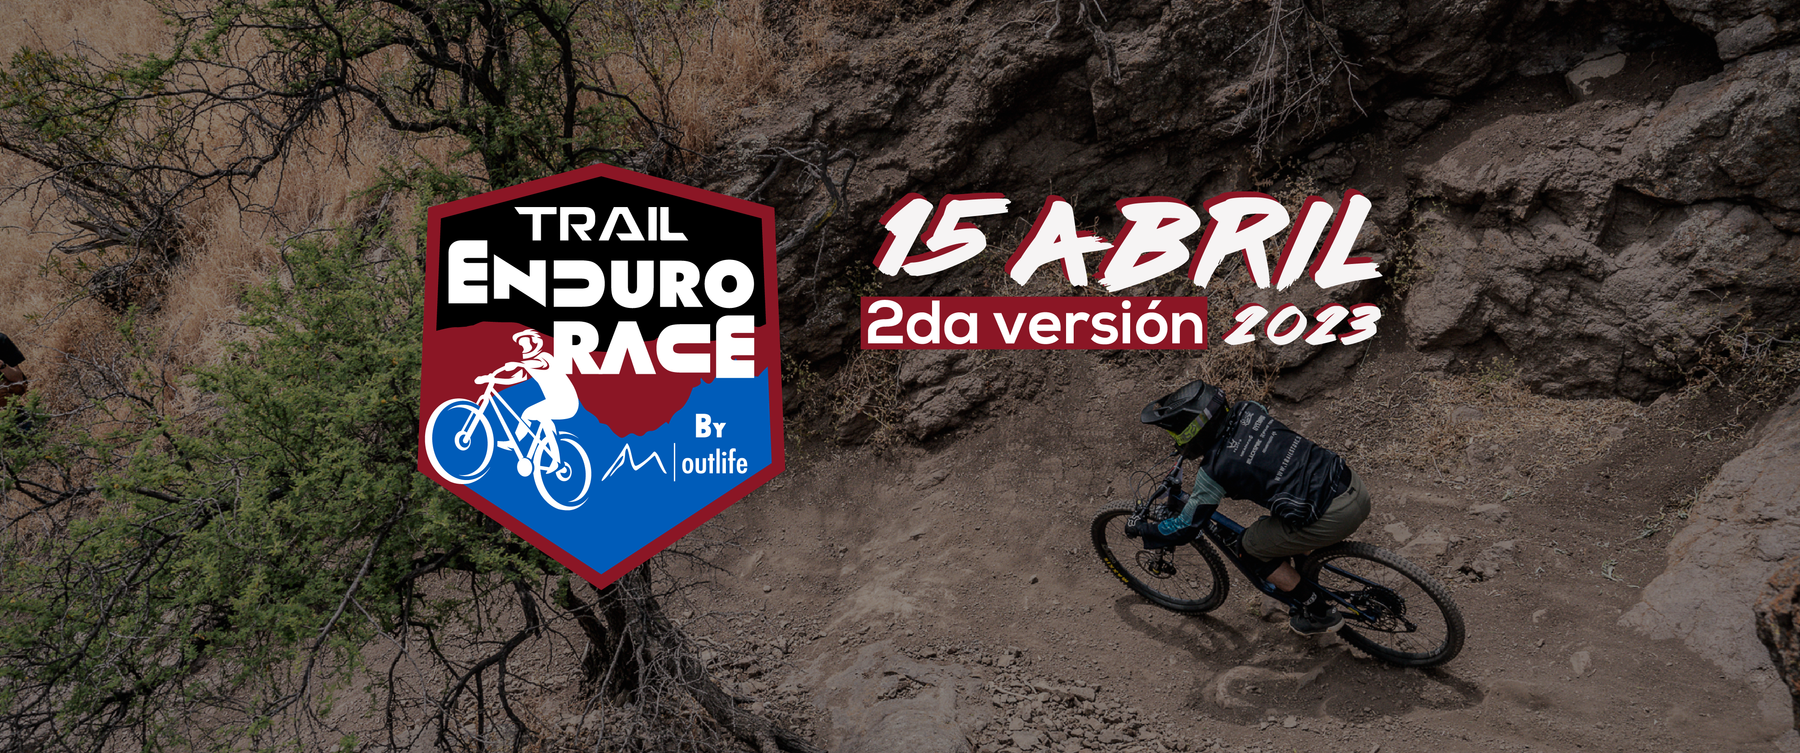 Trail Enduro Race by Outlife 2023